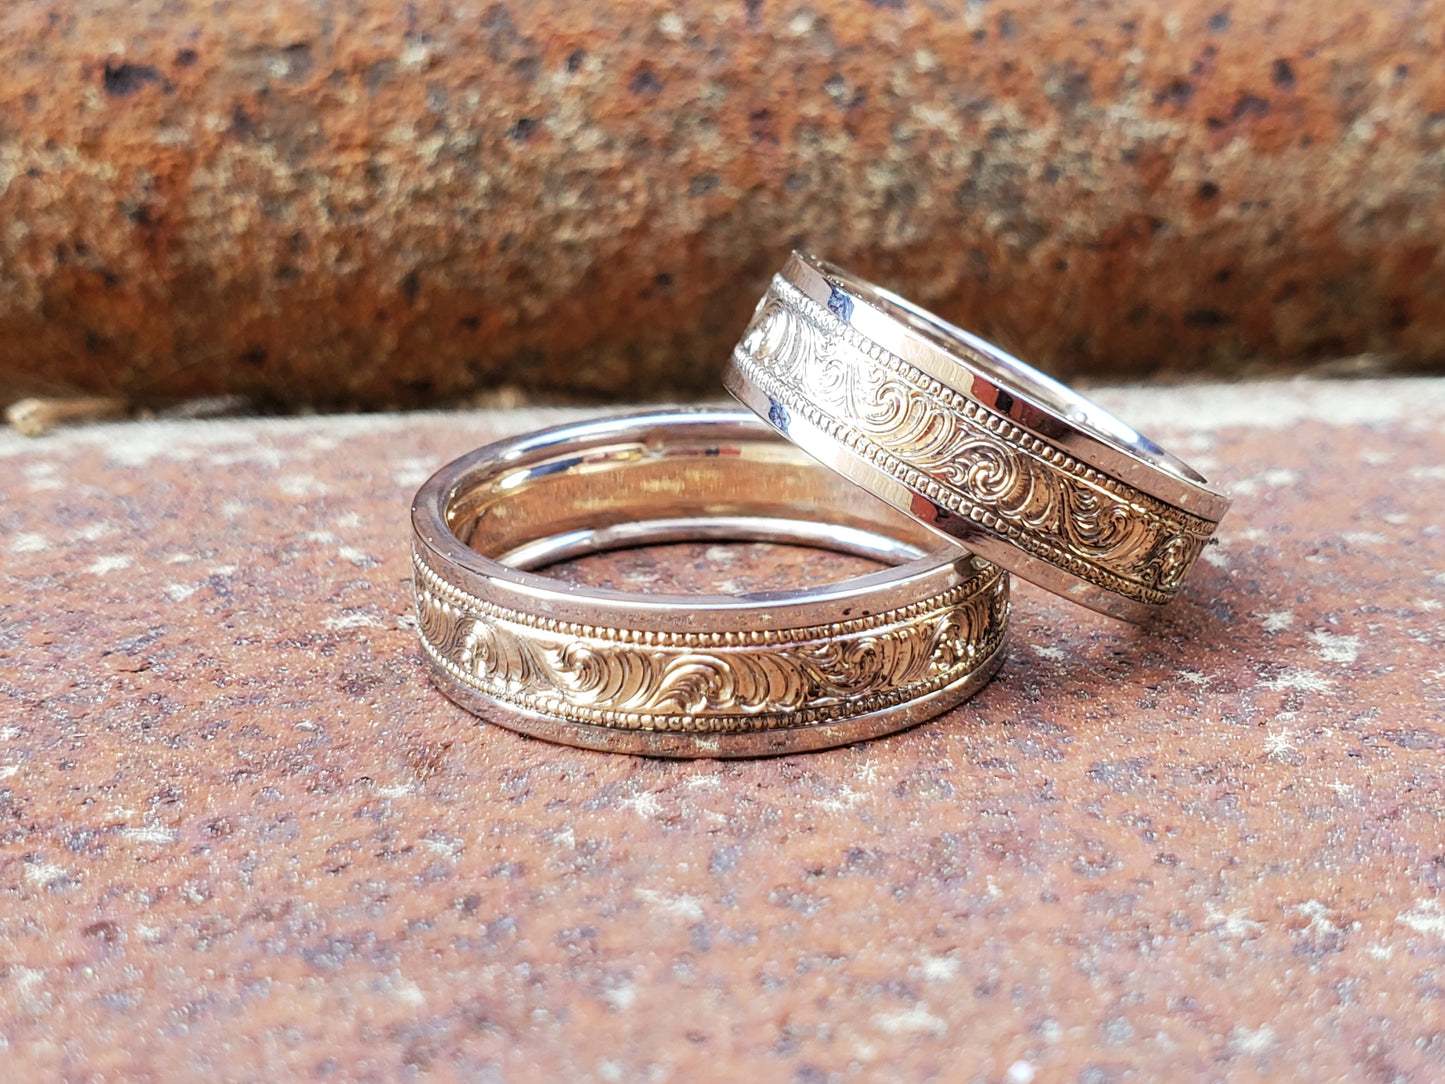 The Augustus: Yellow and White Gold Cowboy Wedding Band, Hand Engraved, Western Gifts for Him